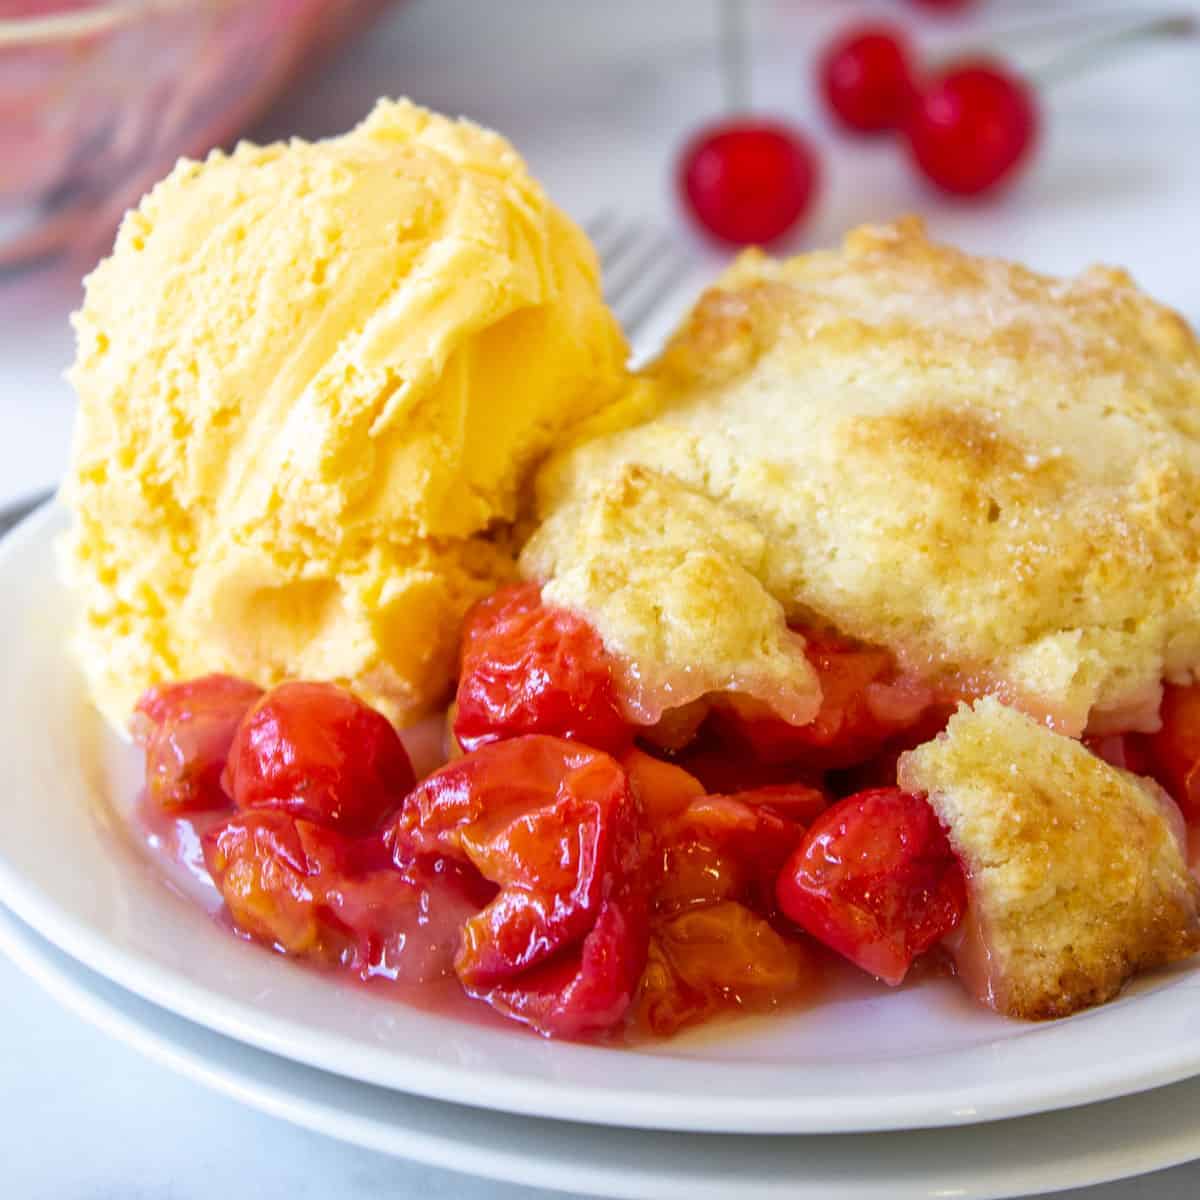 Cherry cobbler with red sour cherries topped with a scoop of vanilla ice cream.